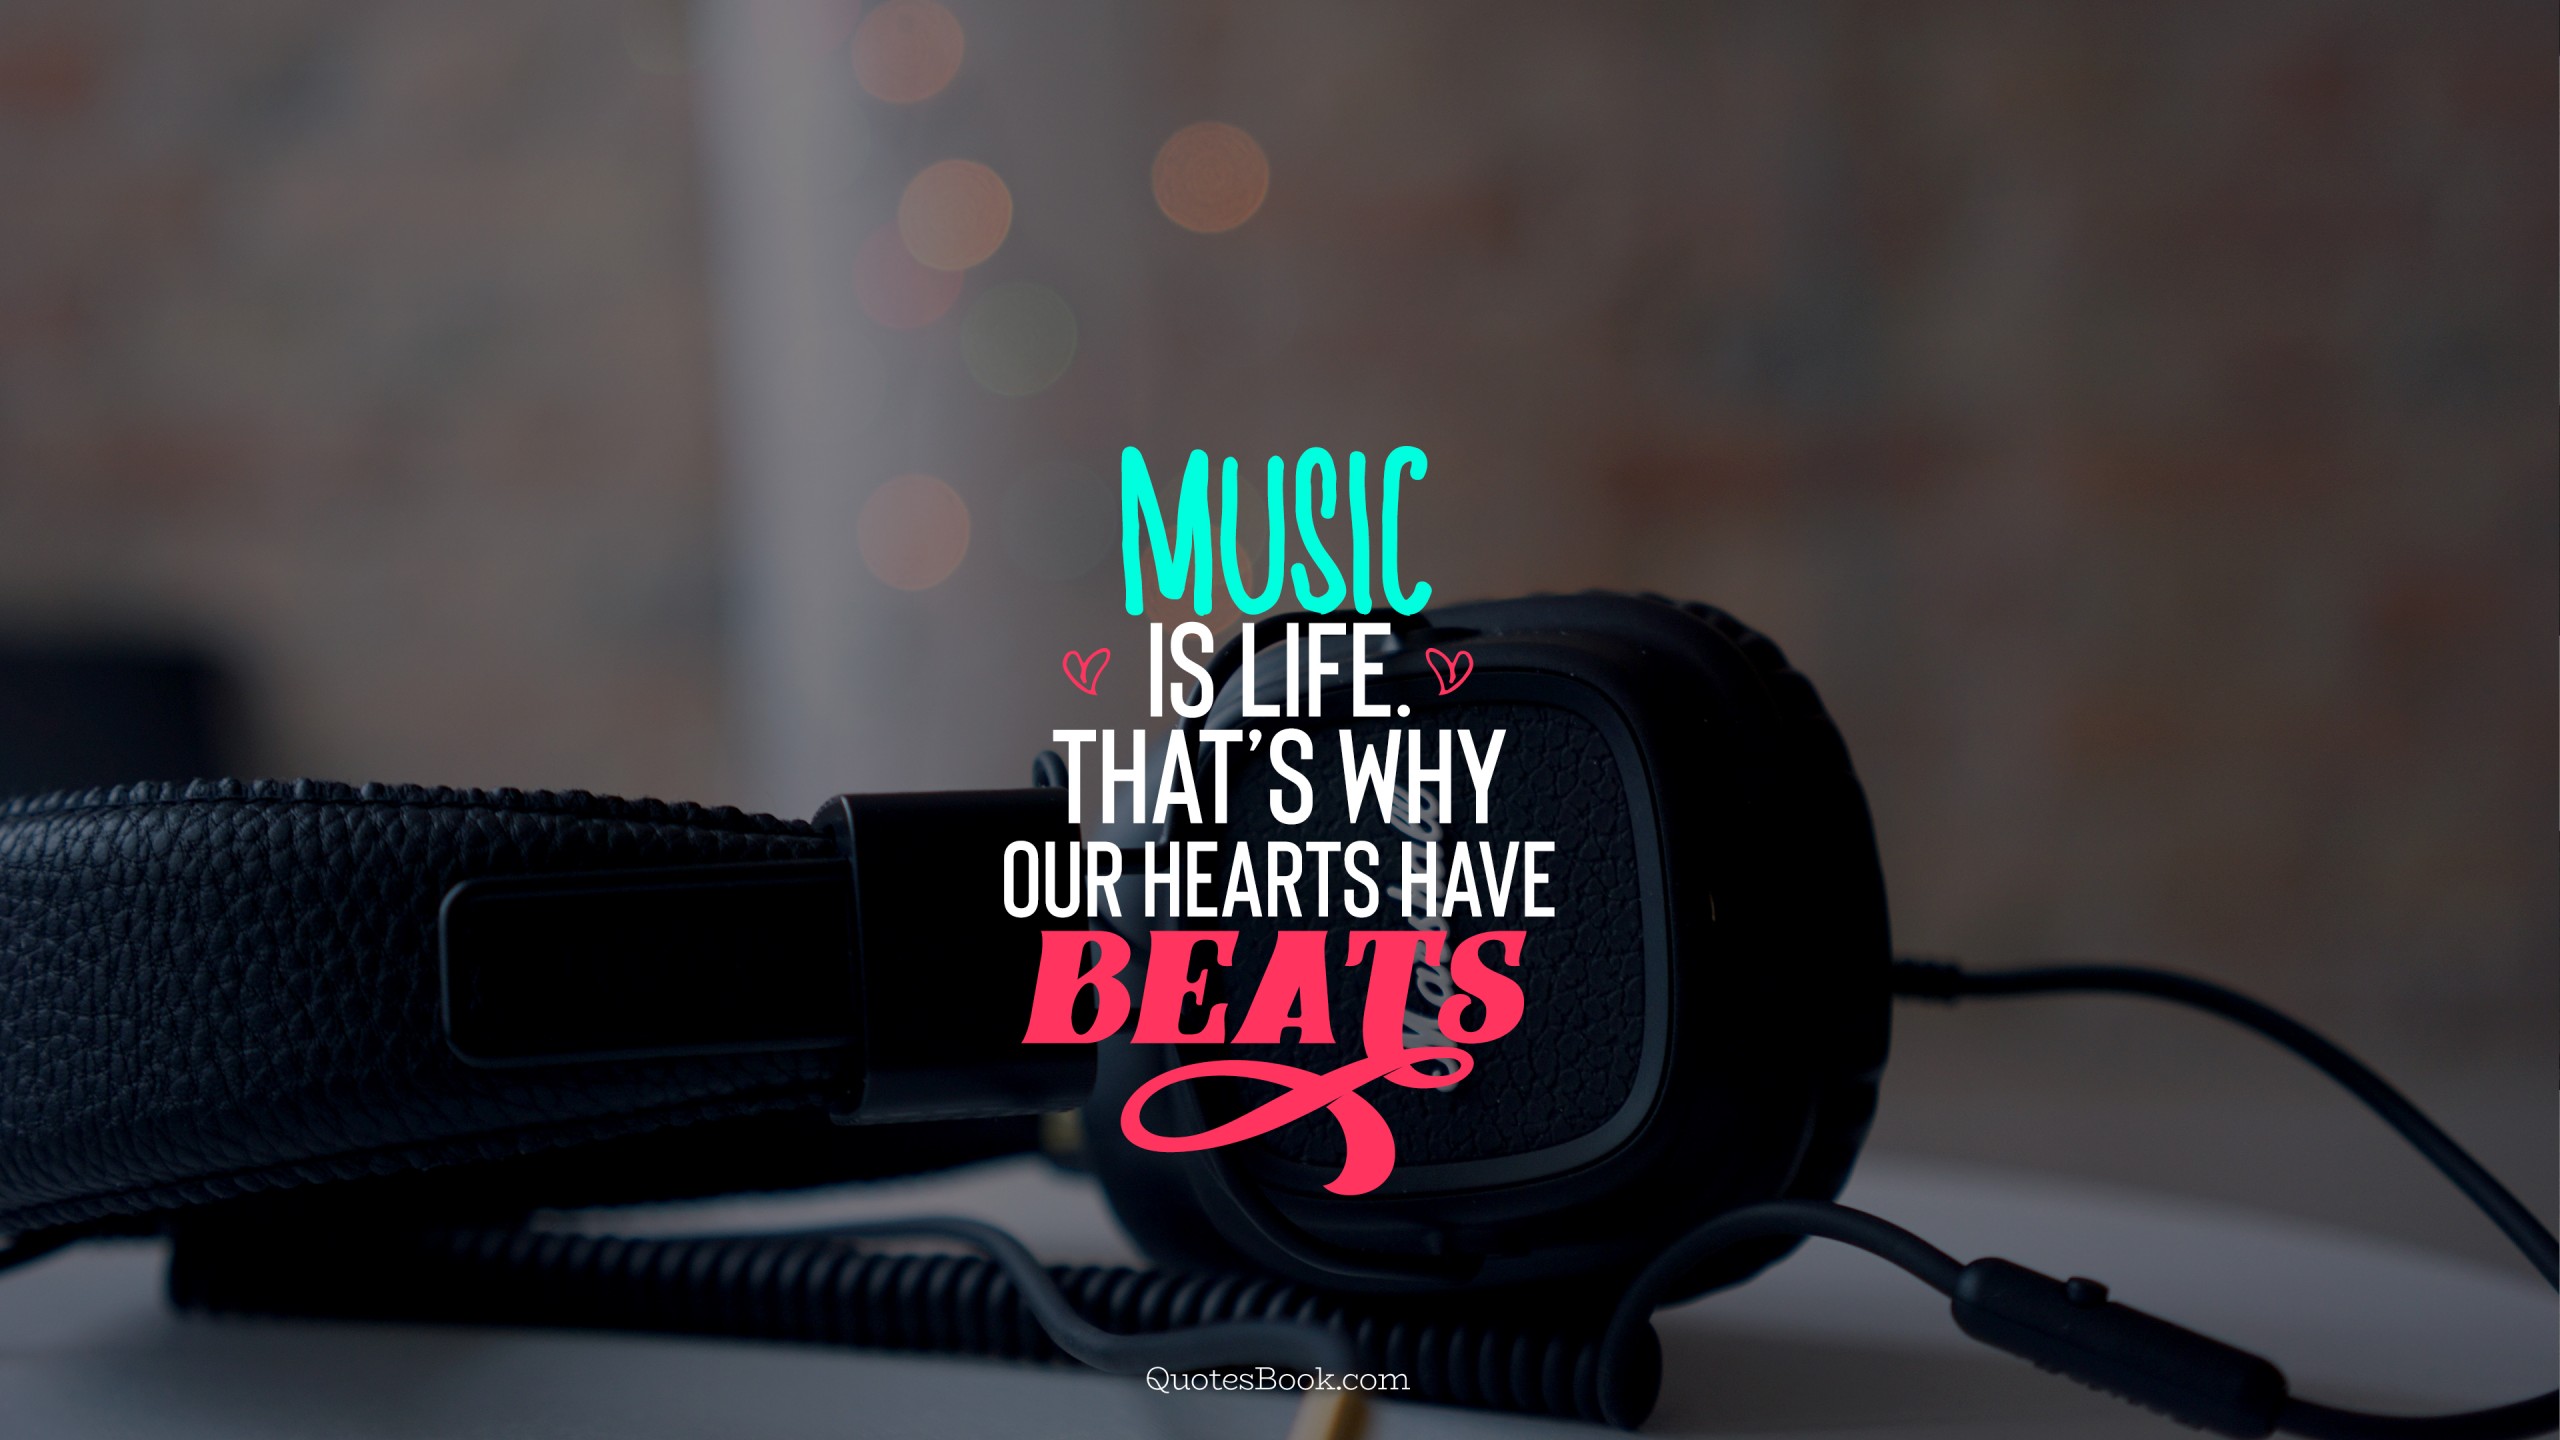 Music Is Life That's Why Our Hearts Have Beats Quote - 2560x1440 Wallpaper  